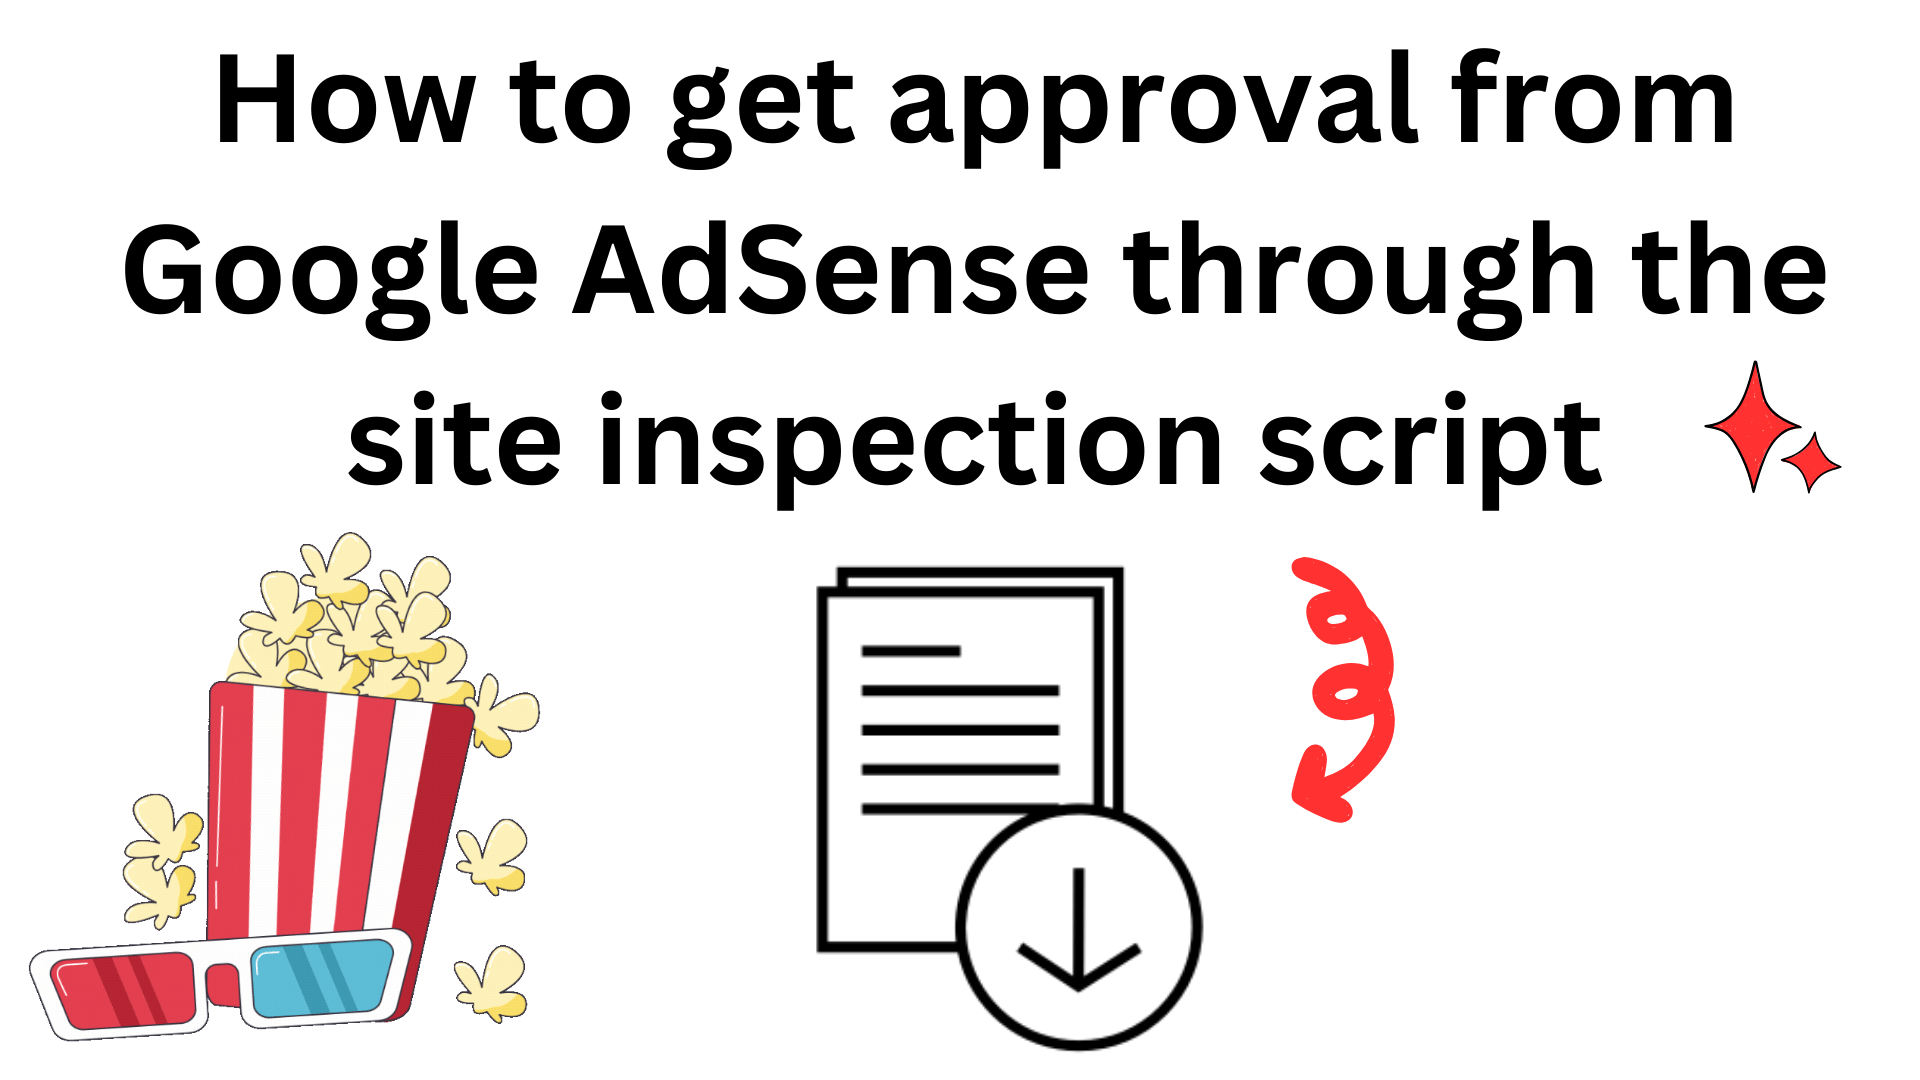 How To Get Approval From Google Adsense Through The Site Inspection Script